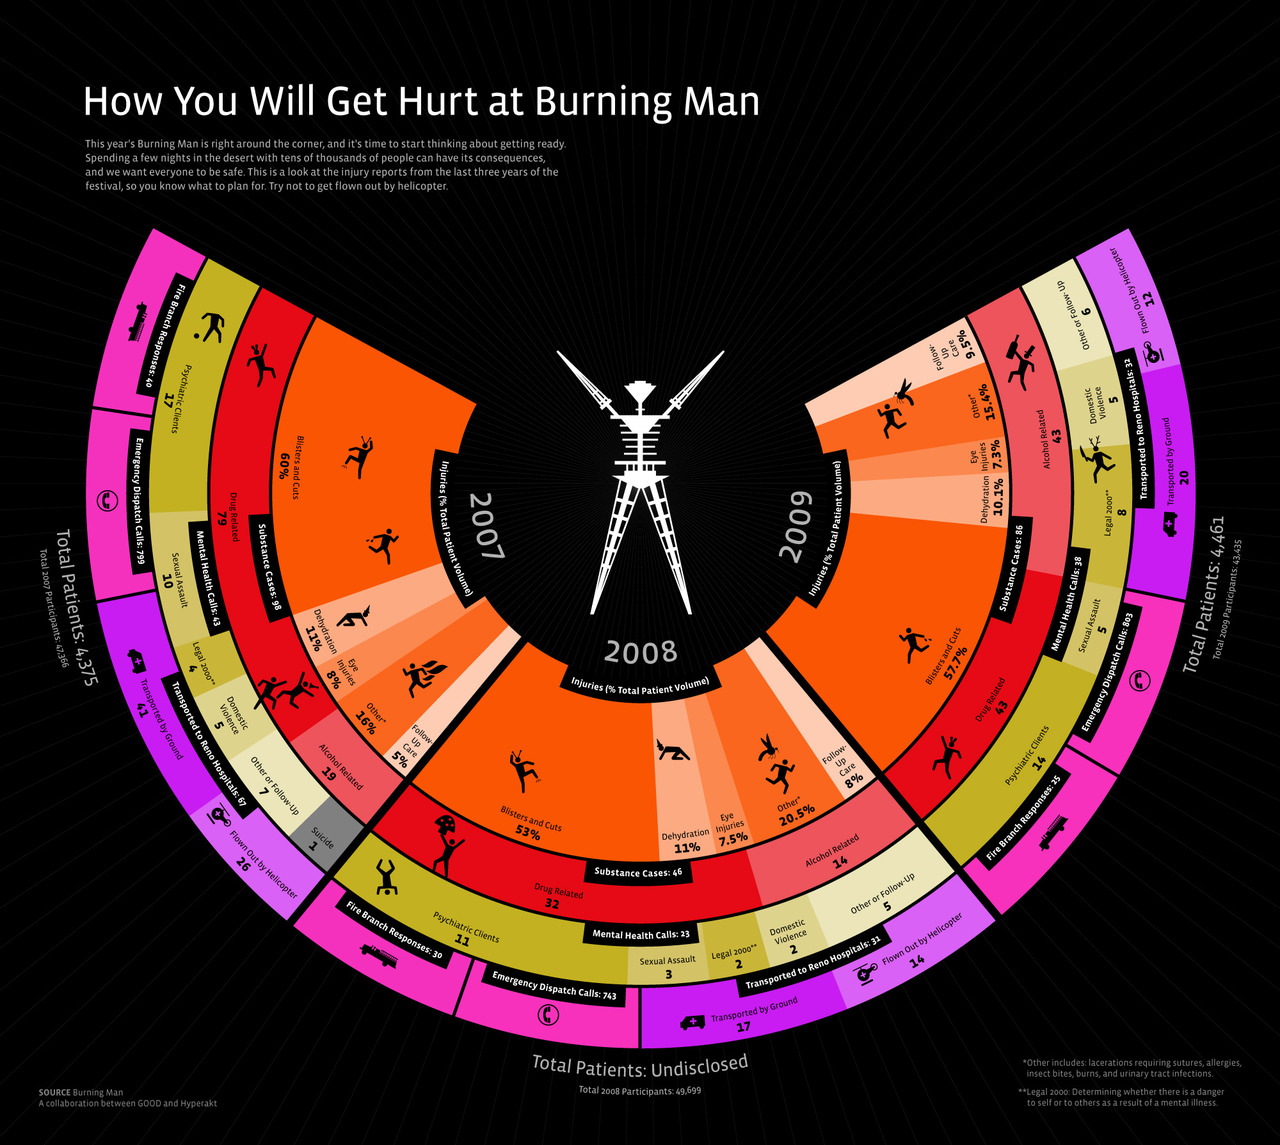 How You Will Get Hurt at Burning Man